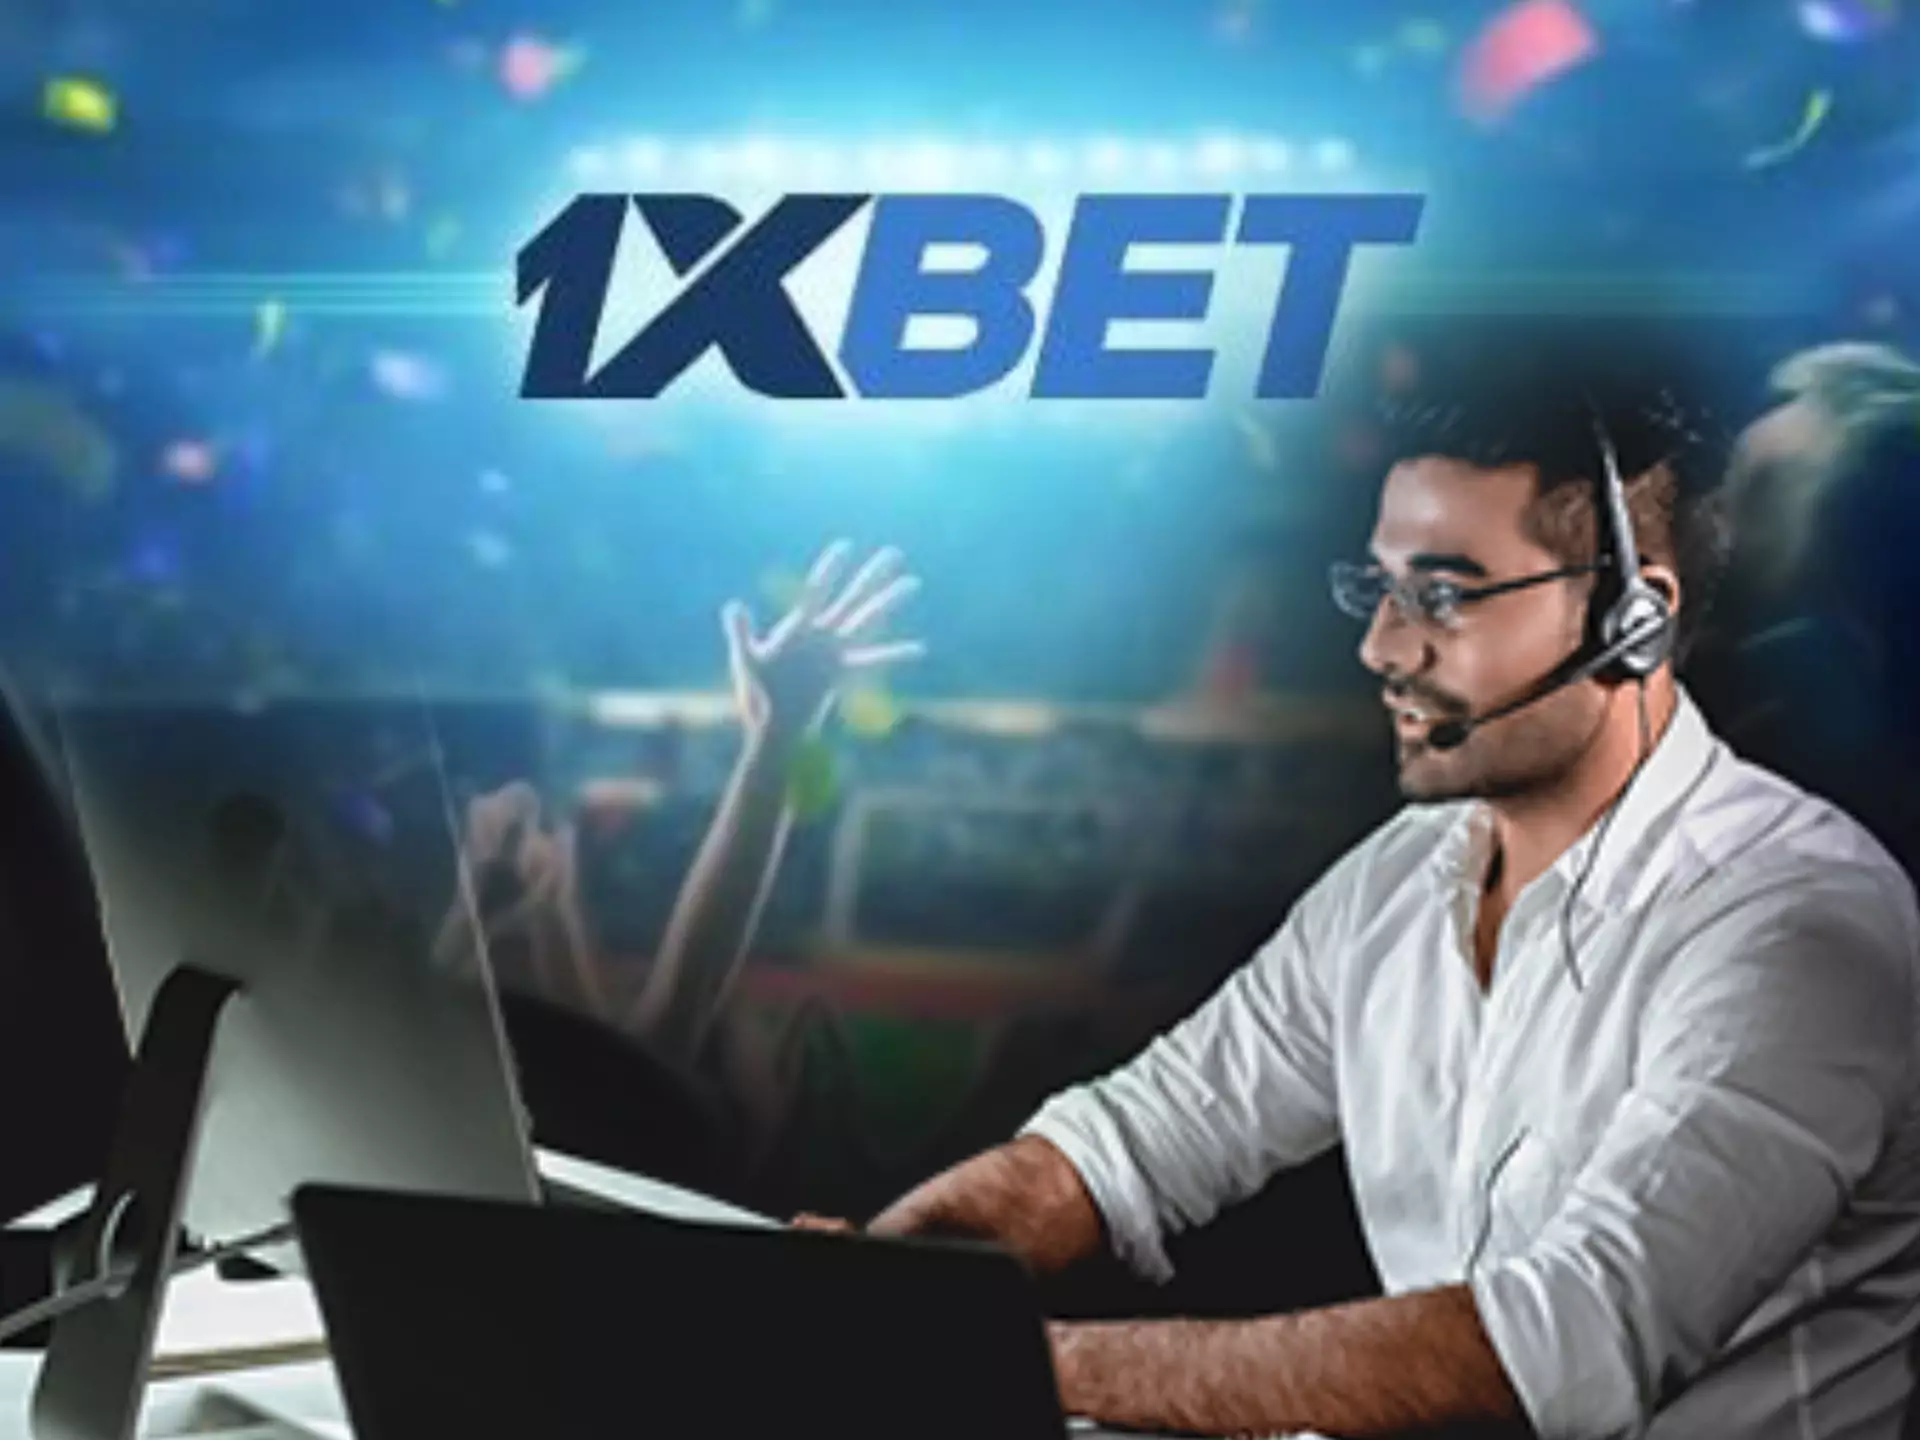 1xbet Customer support will help you to solve any bettin-related problems.